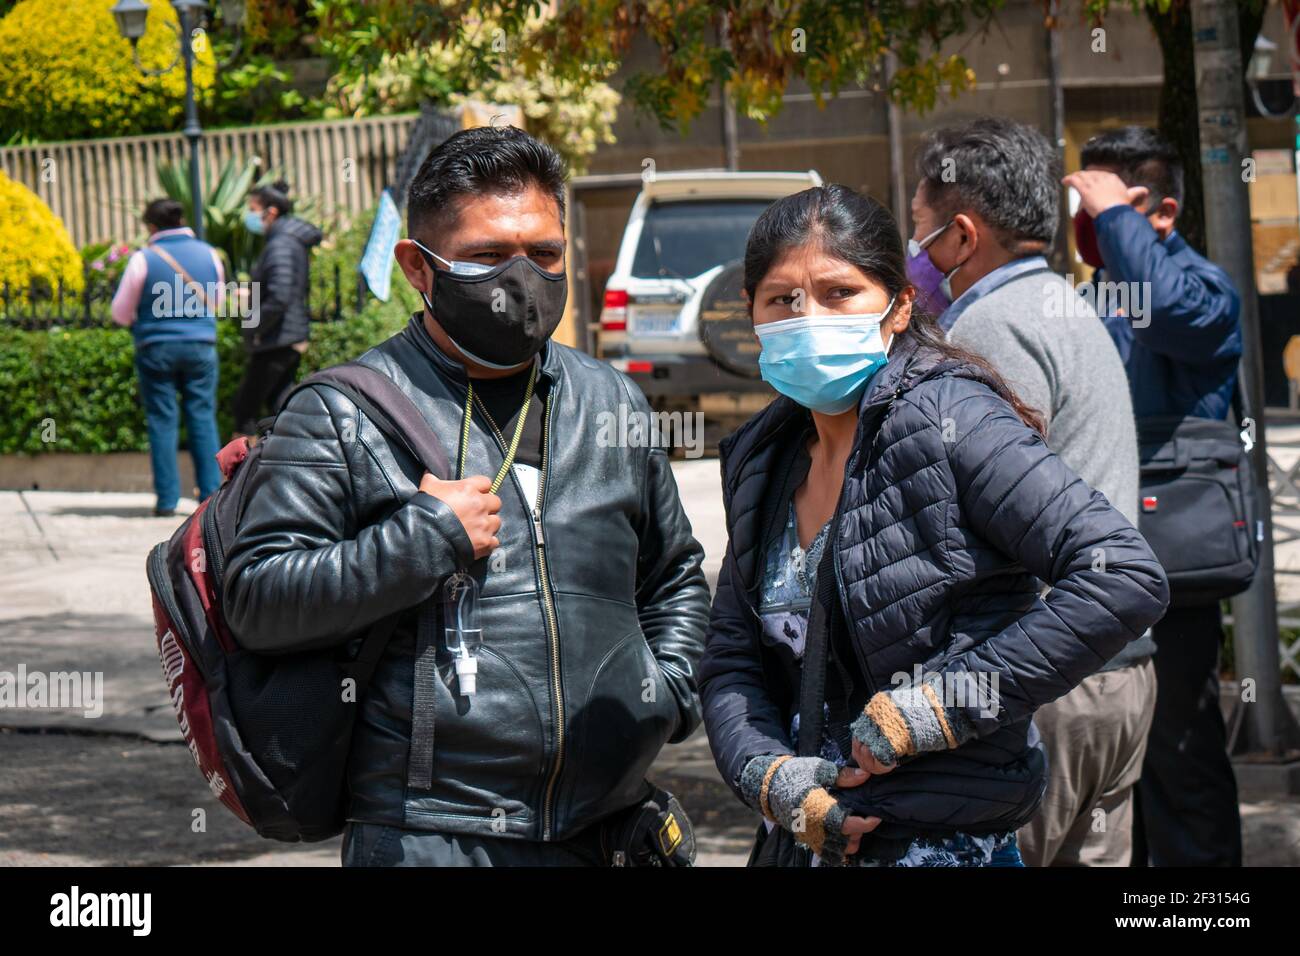 La Paz, Bolivia - February 11 2021: Bolivian Indigenous Woman and Man Waiting for Public Transportation on the Street Stock Photo